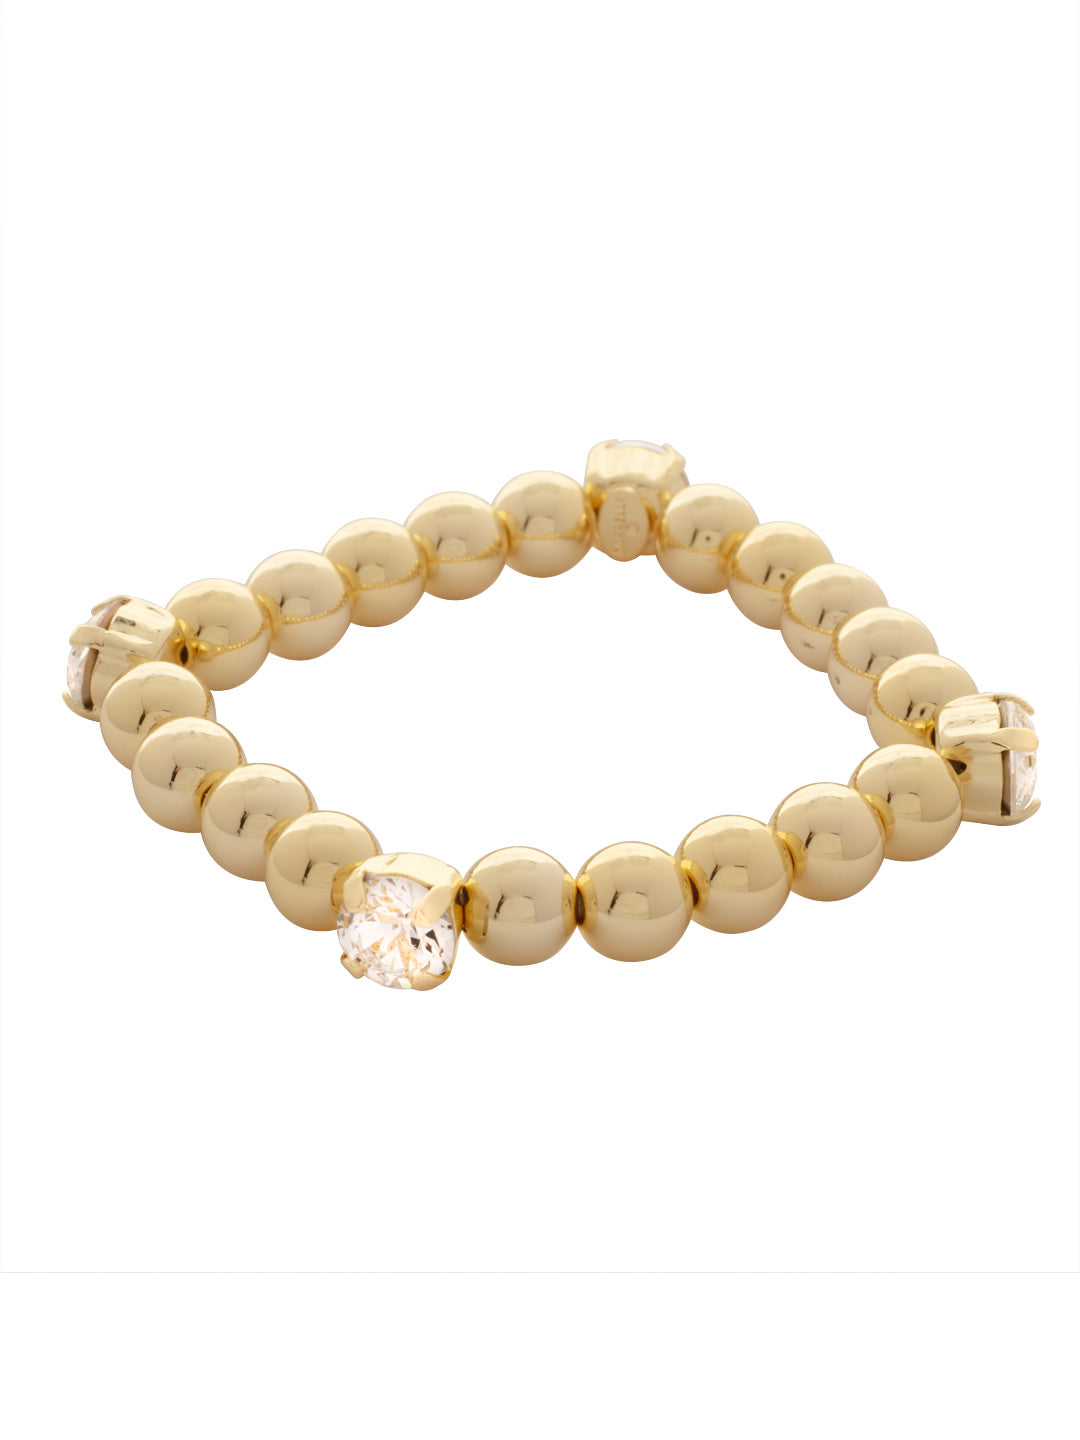 Four Crystal Stretch Bracelet - 4BFJ22BGCRY - <p>The Four Crystal Stretch Bracelet features repeating metal beads and four round cut crystals on a multi-layered stretchy jewelry filament, creating a durable and trendy piece. From Sorrelli's Crystal collection in our Bright Gold-tone finish.</p>